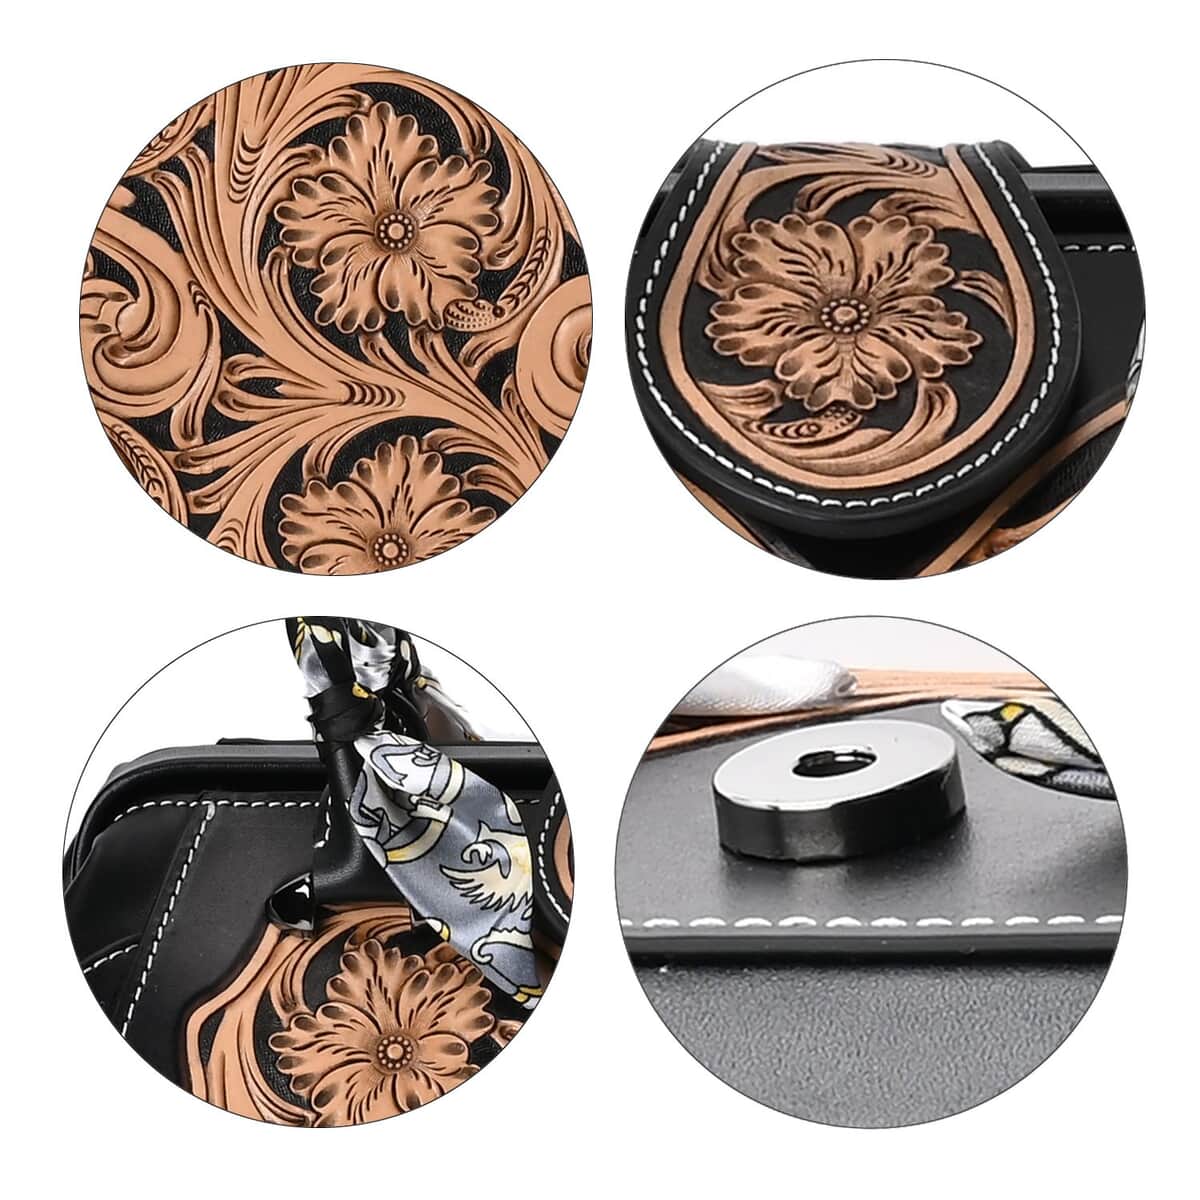 Grand Pelle Black with Solid Color Hand Engraving Flower Pattern Genuine Leather Crossbody Bag (14"x9"x7") image number 5